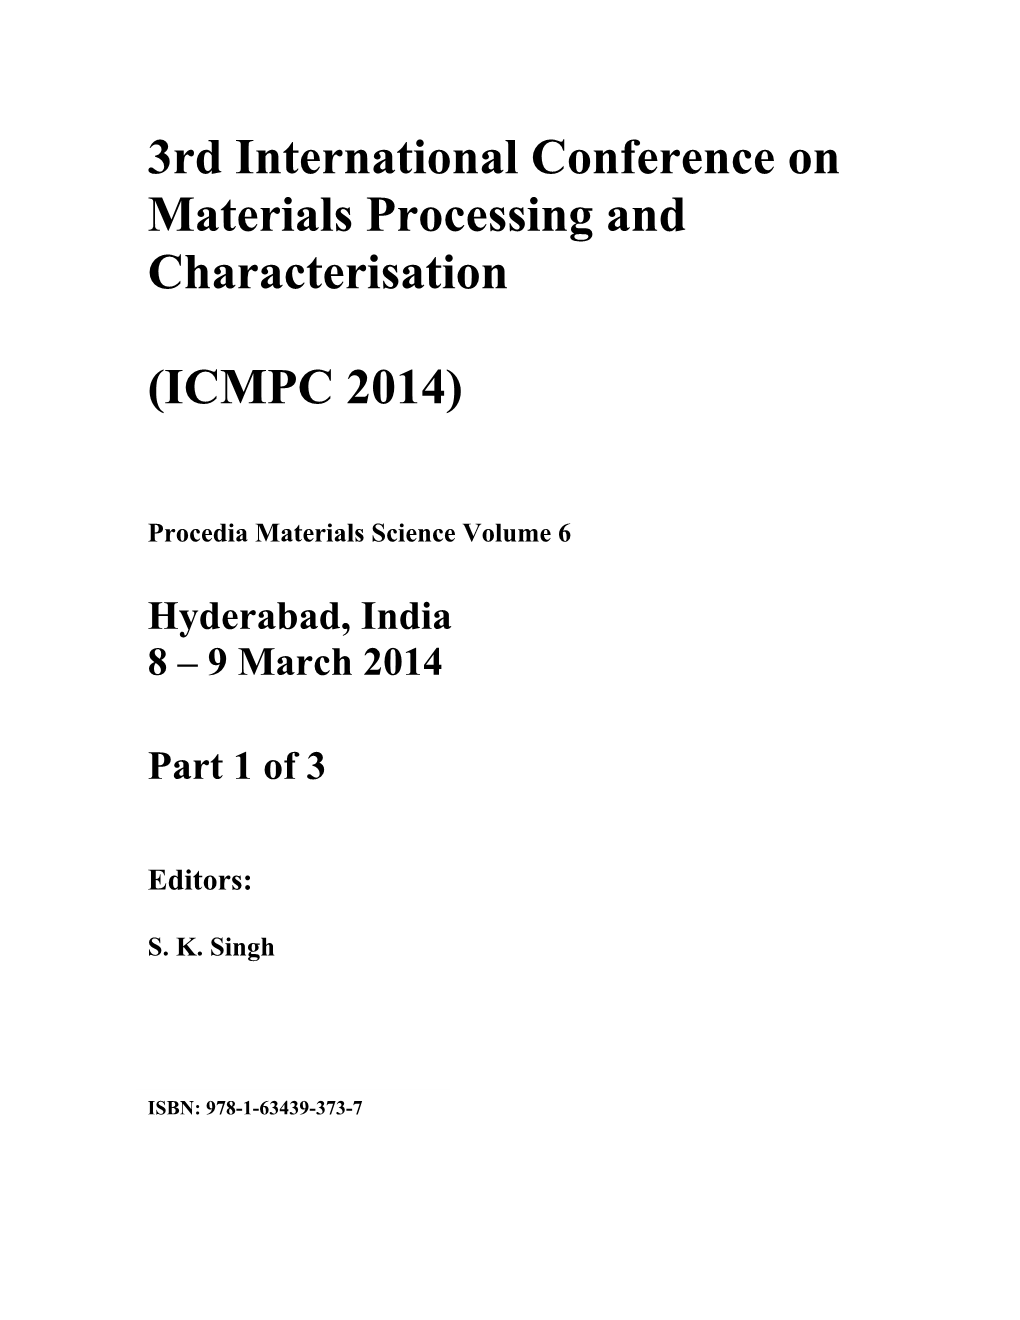 3Rd International Conference on Materials Processing and Characterisation